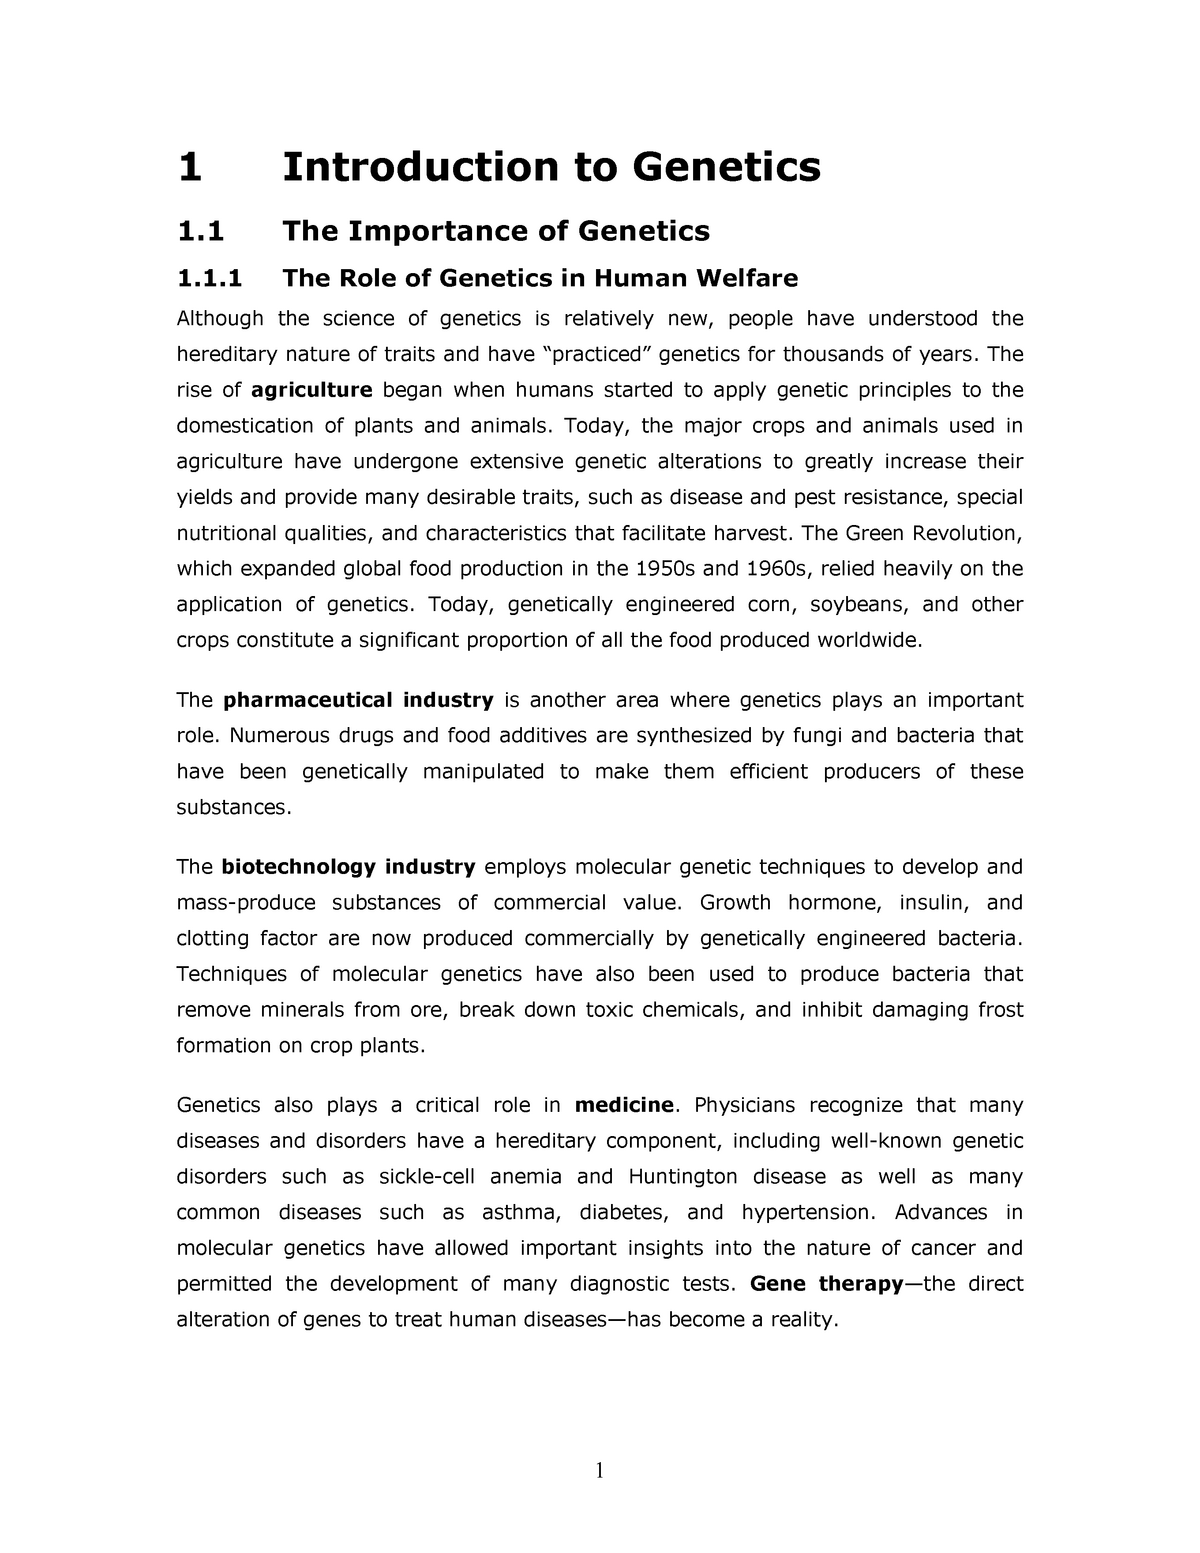 assignment 1.1 introduction to genetics